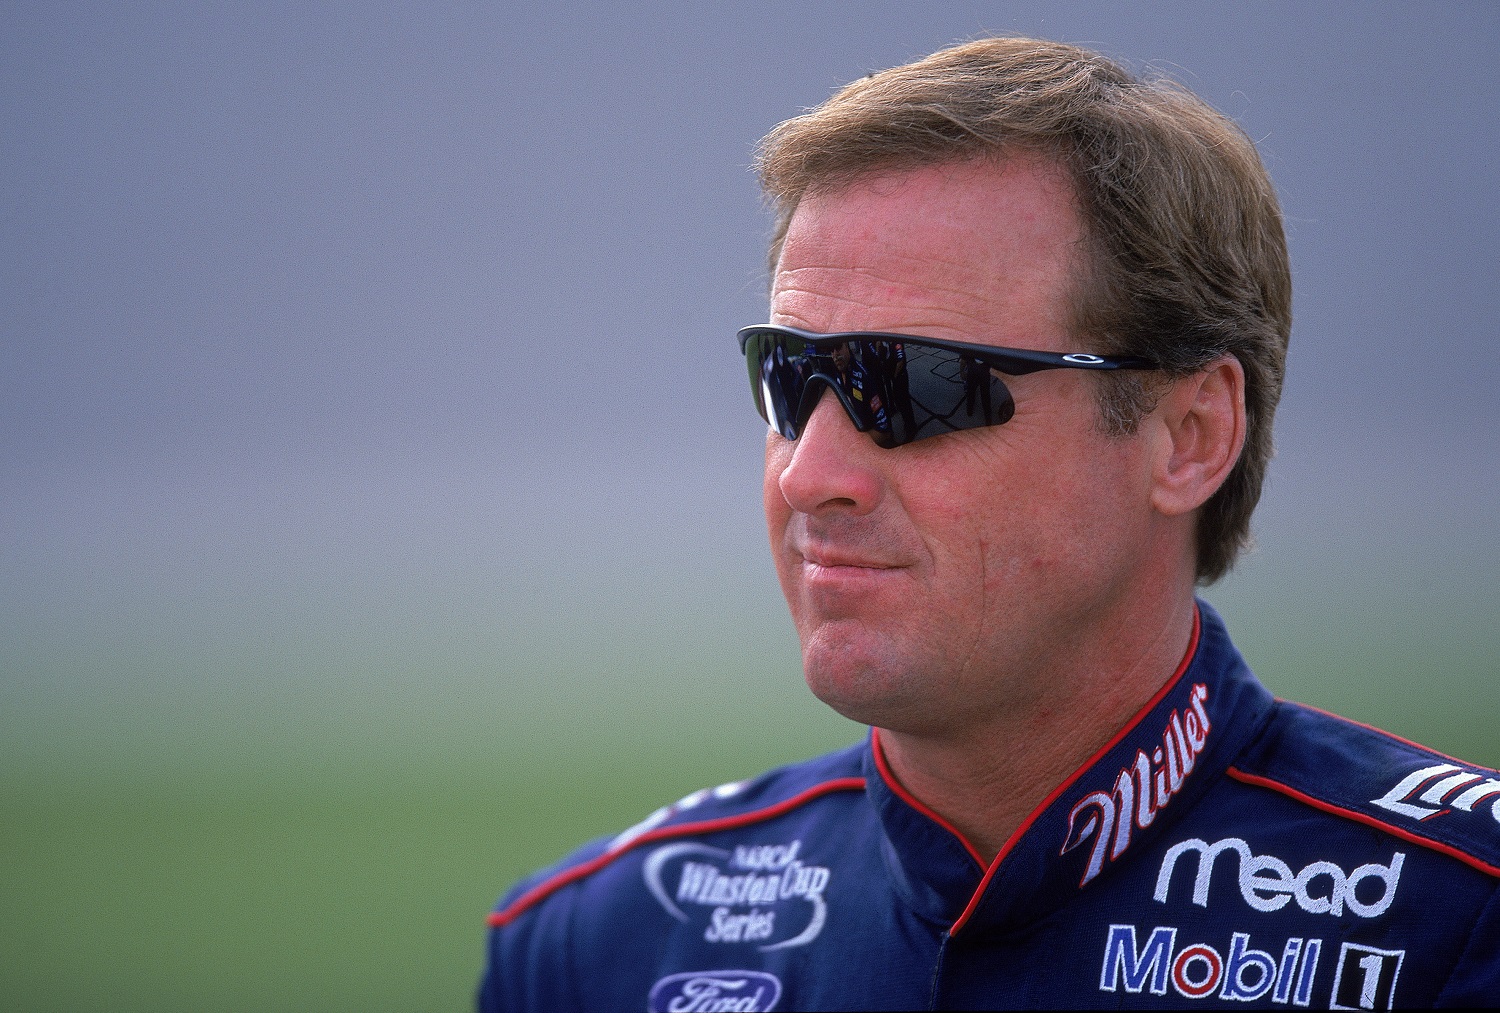 Rusty Wallace looks on during the Talladega 500, part of the NASCAR Winston Cup Series at the Talladega Super Speedway on April 20, 2001. | Craig Jones  /Allsport via Getty Images